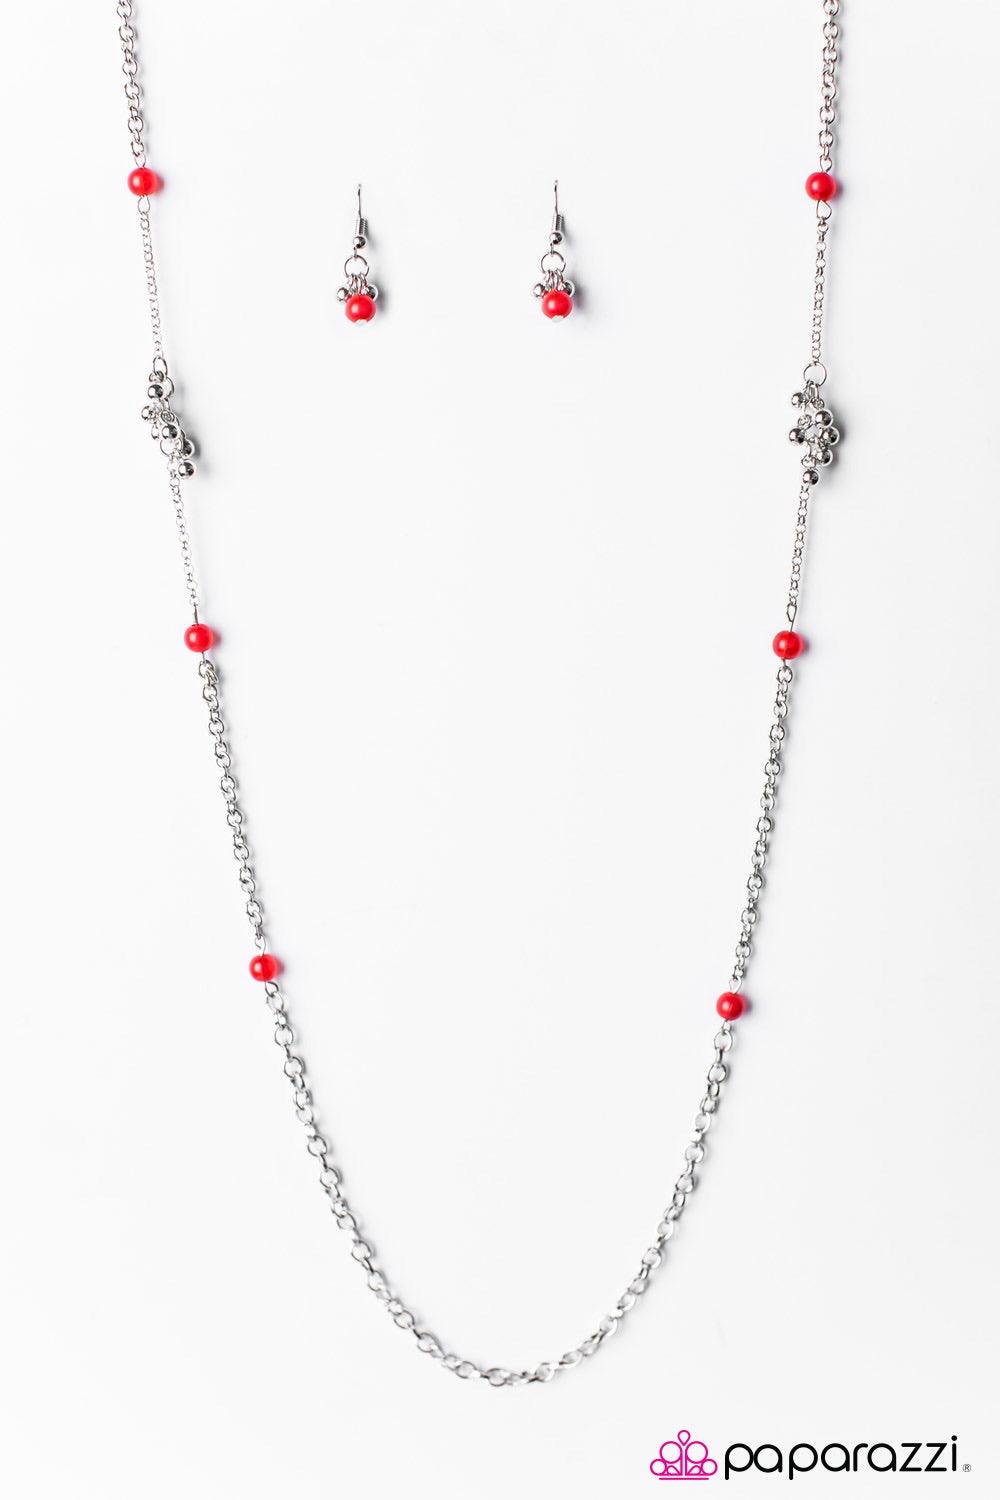 Paparazzi Accessories Twinkling Twilight - Red Red beads trickle down an elongated silver chain, creating a whimsical display. Clusters of dainty silver beads create fun and flirty accents as they trickle down the chain. Features an adjustable clasp closu